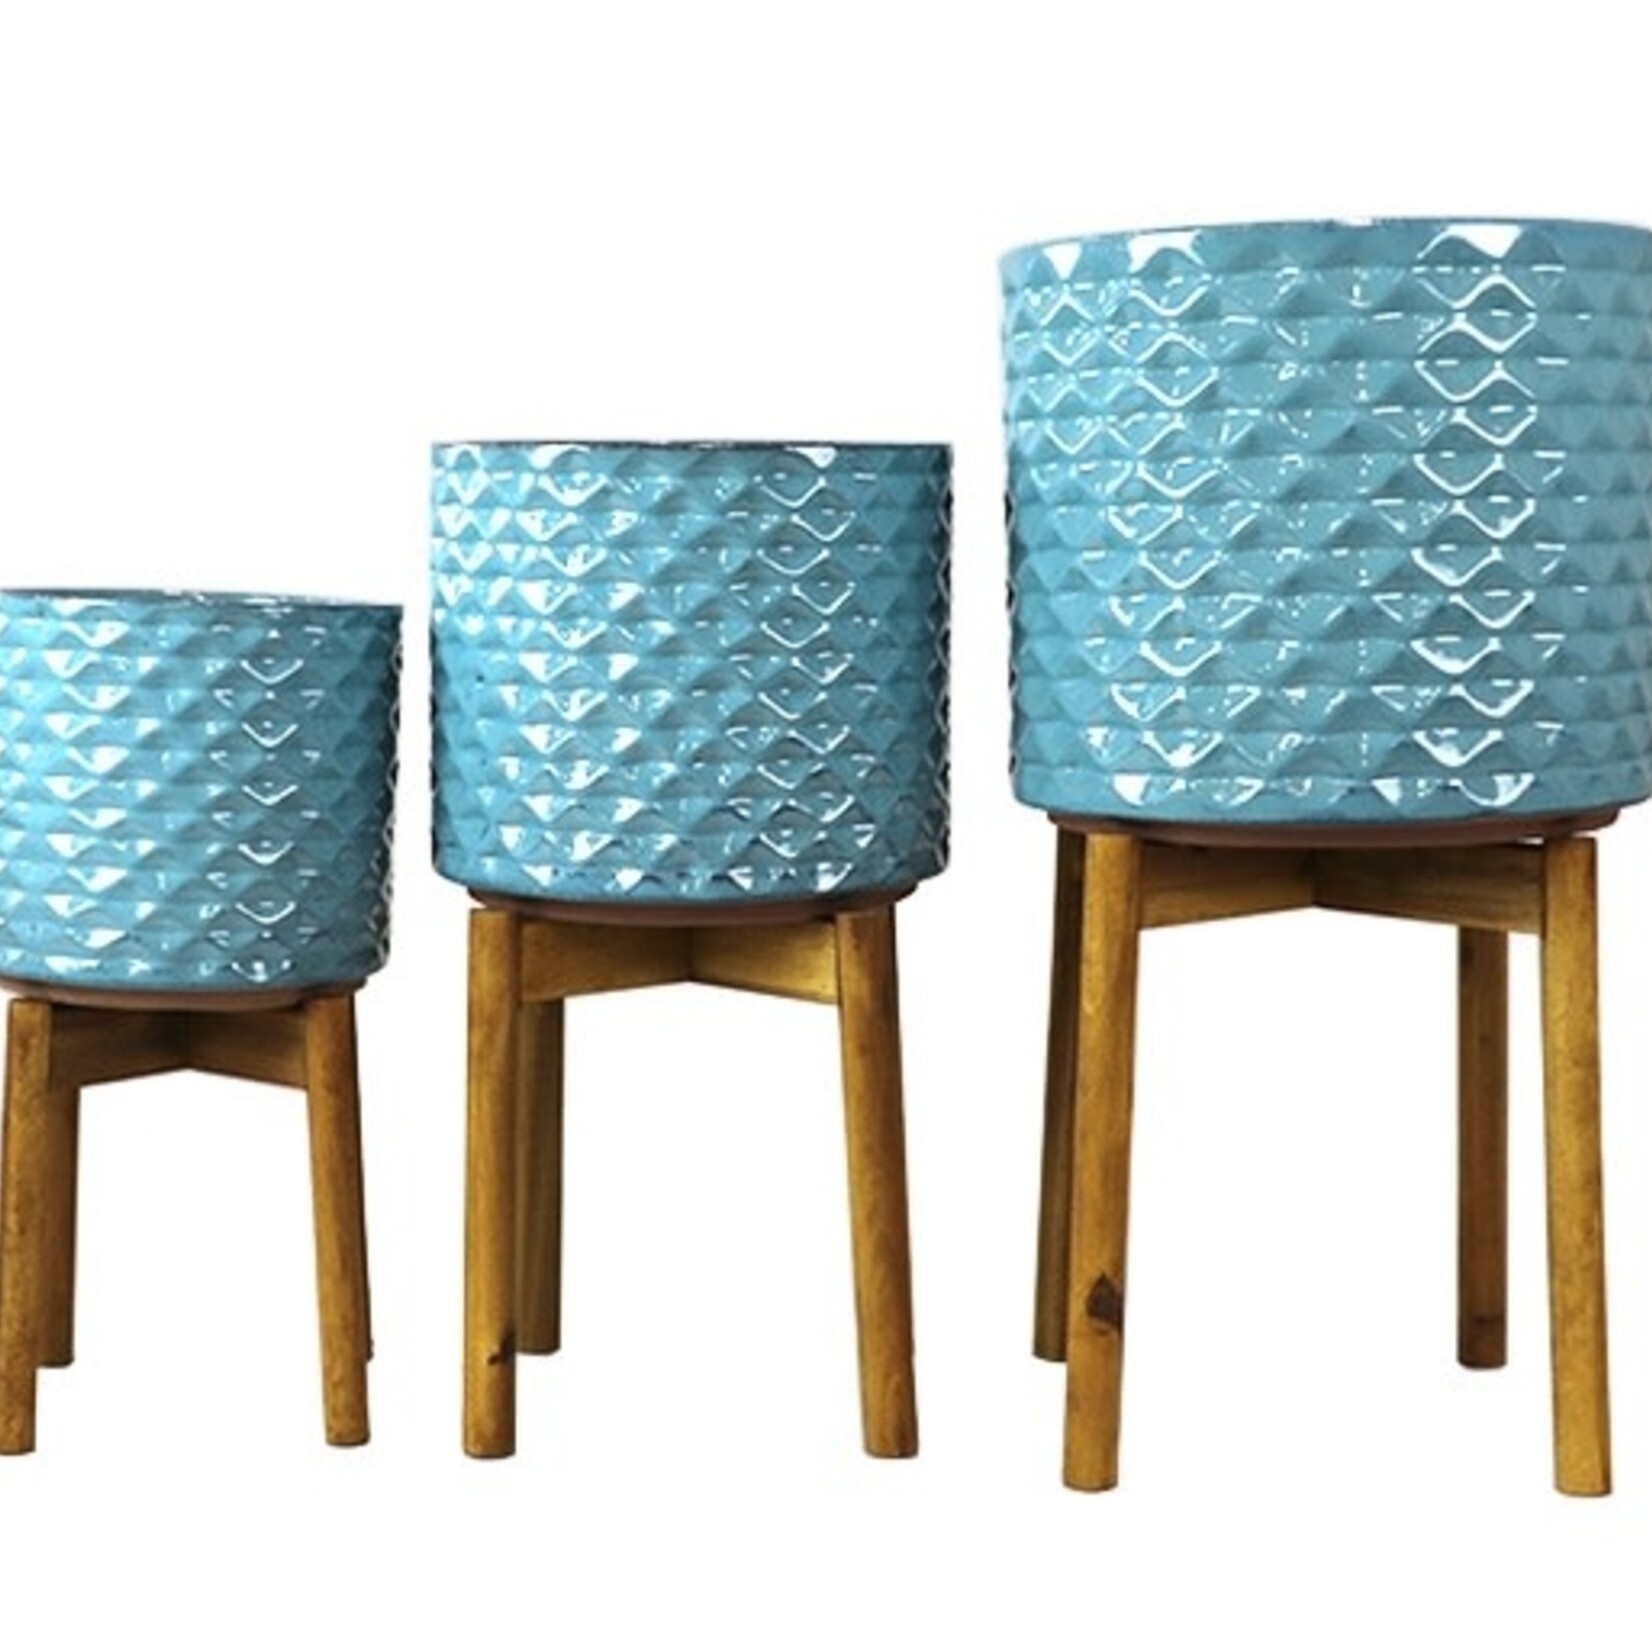 Blue Rae Plant Stands - Large Turquoise